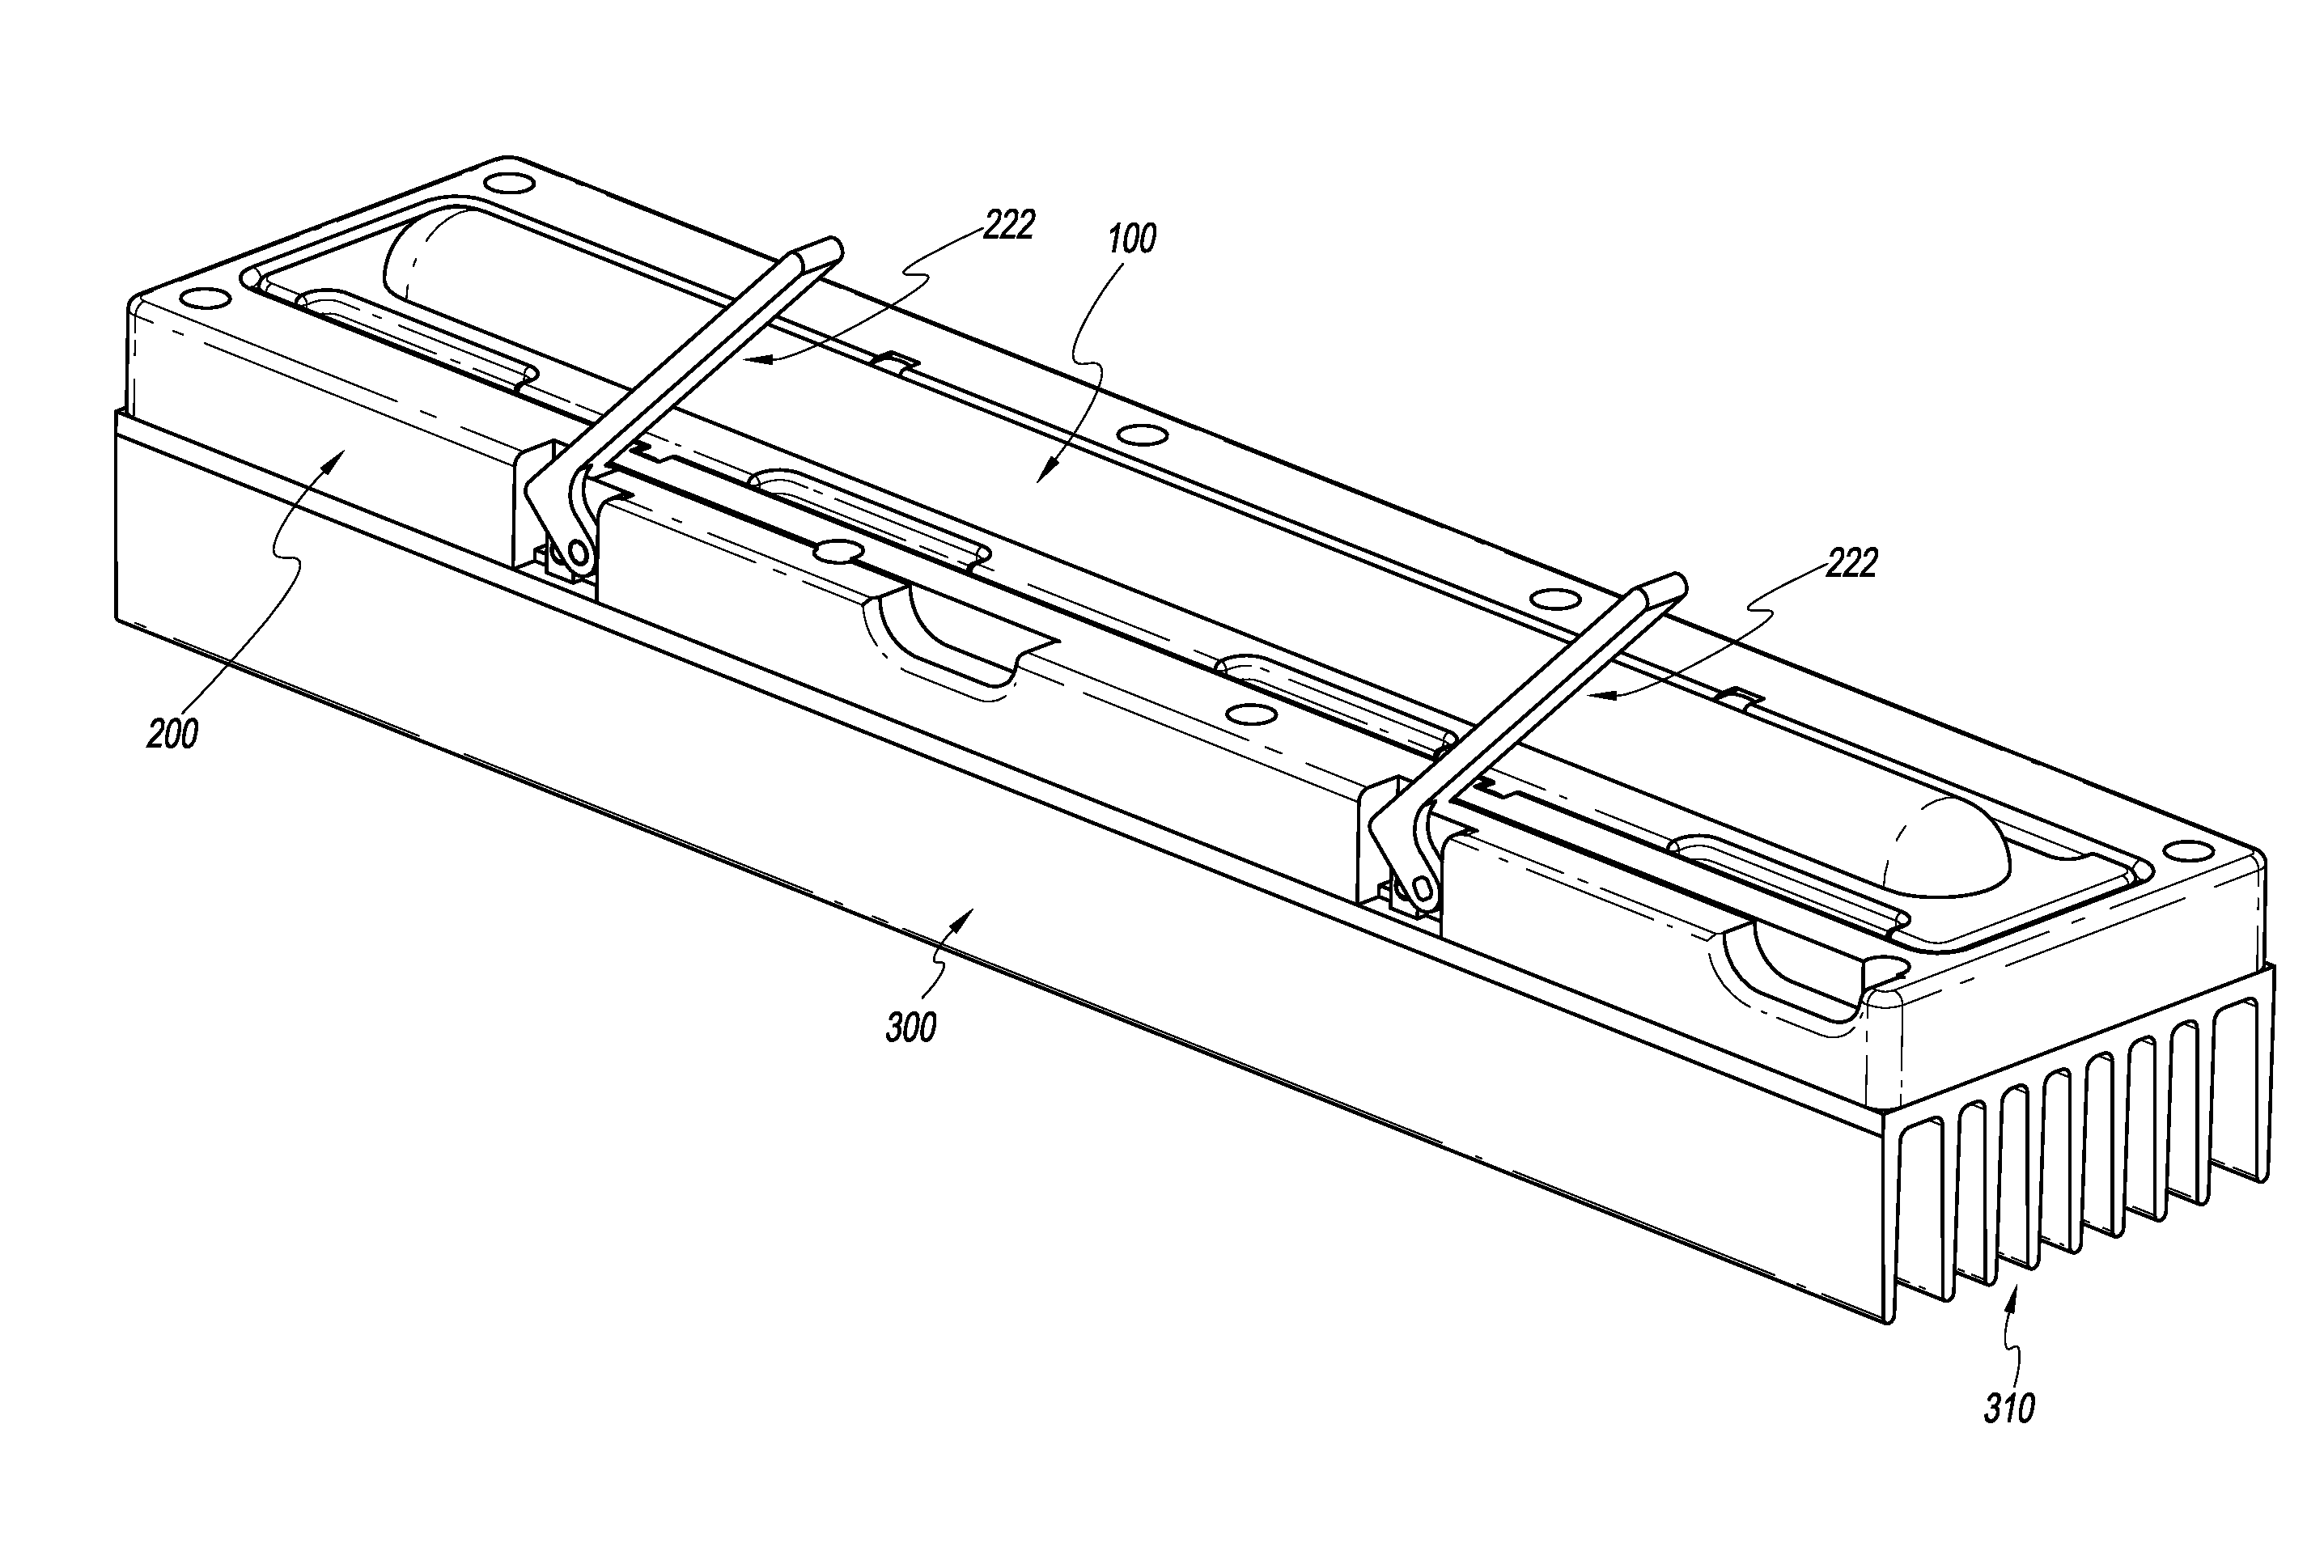 Linear LED module and socket for same